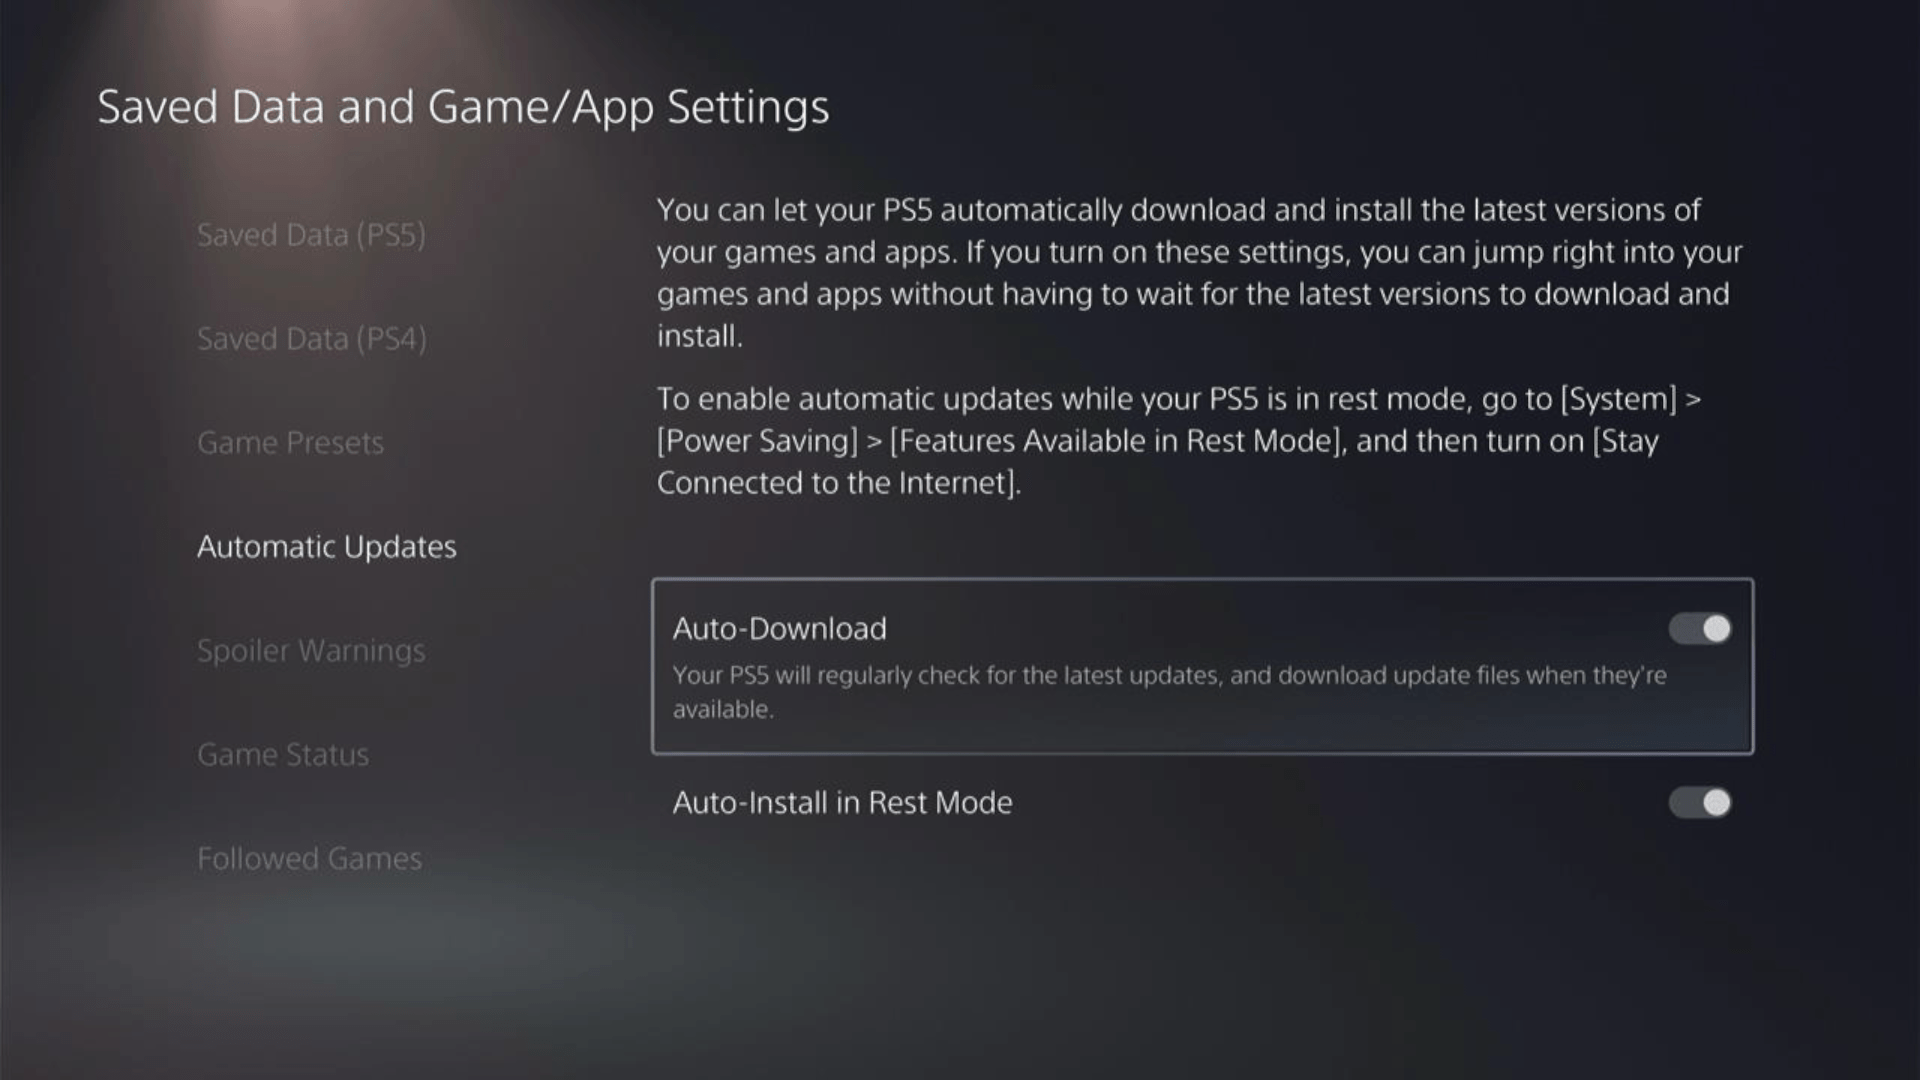 In the Saved Data and Game/App Settings window, select Automatic Updates from the left sidebar to enable automatic game updates to avoid multiplayer issues